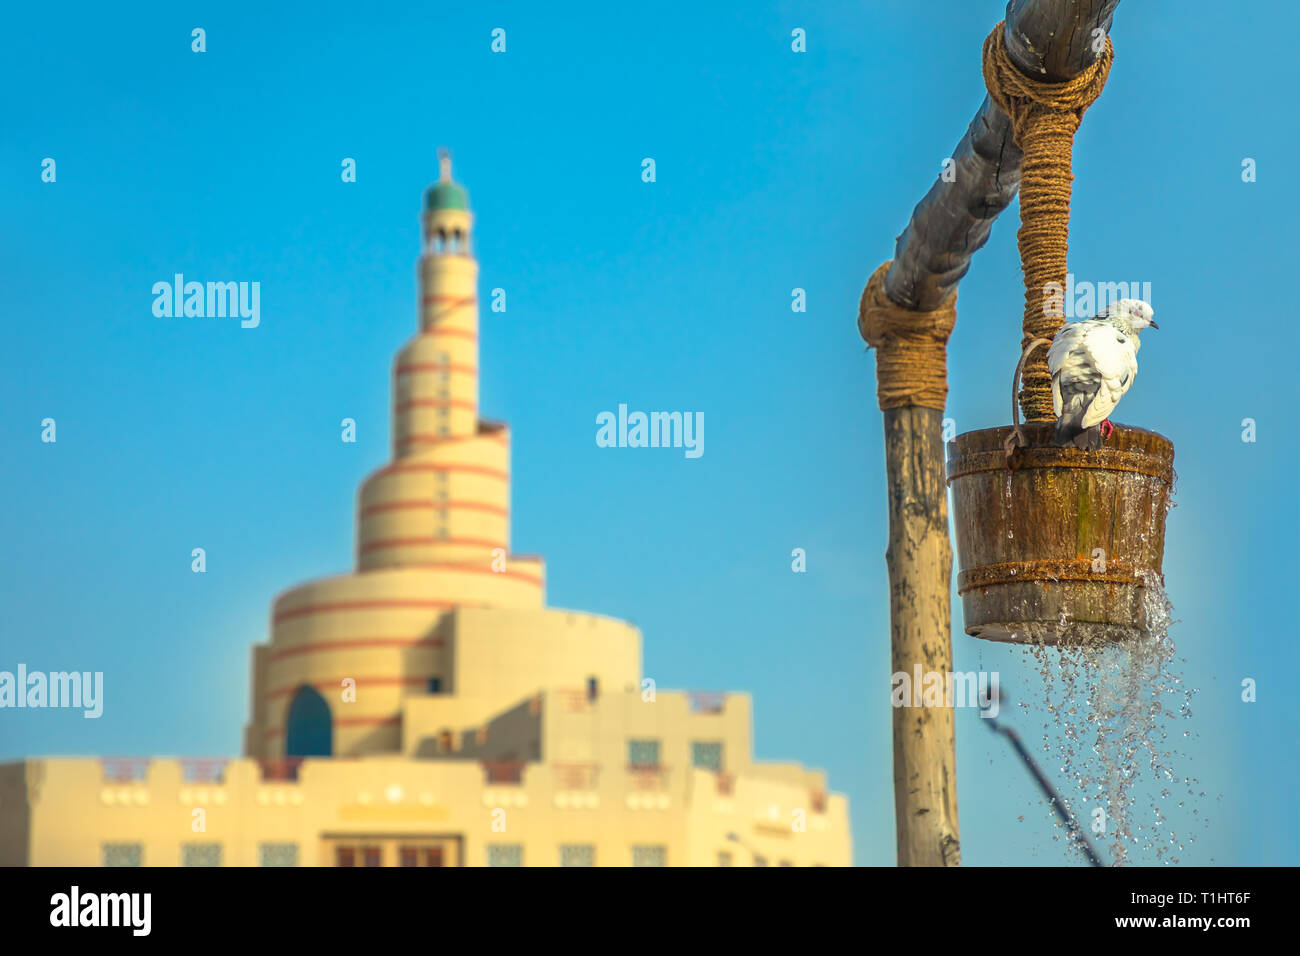 Pigeon drinks water at old well fountain, iconic landmark in the middle of Souq Waqif in Doha city center, Qatar. Middle East, Arabian Peninsula Stock Photo